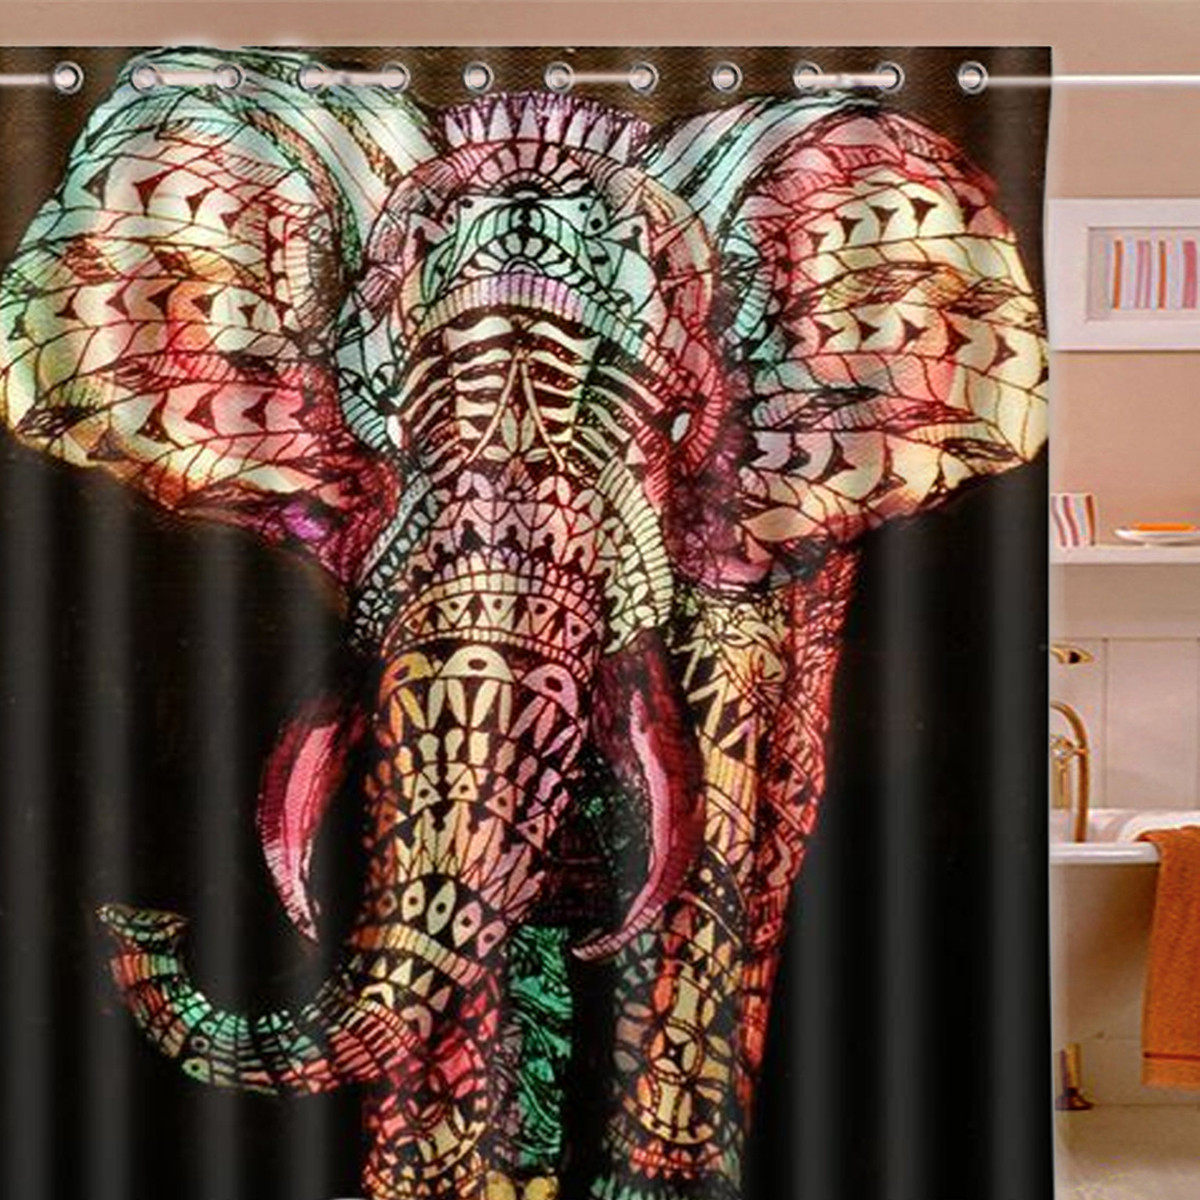 180x180cm Waterproof Colorful Elephant Polyester Shower Curtain Bathroom Decor with 12 Hooks